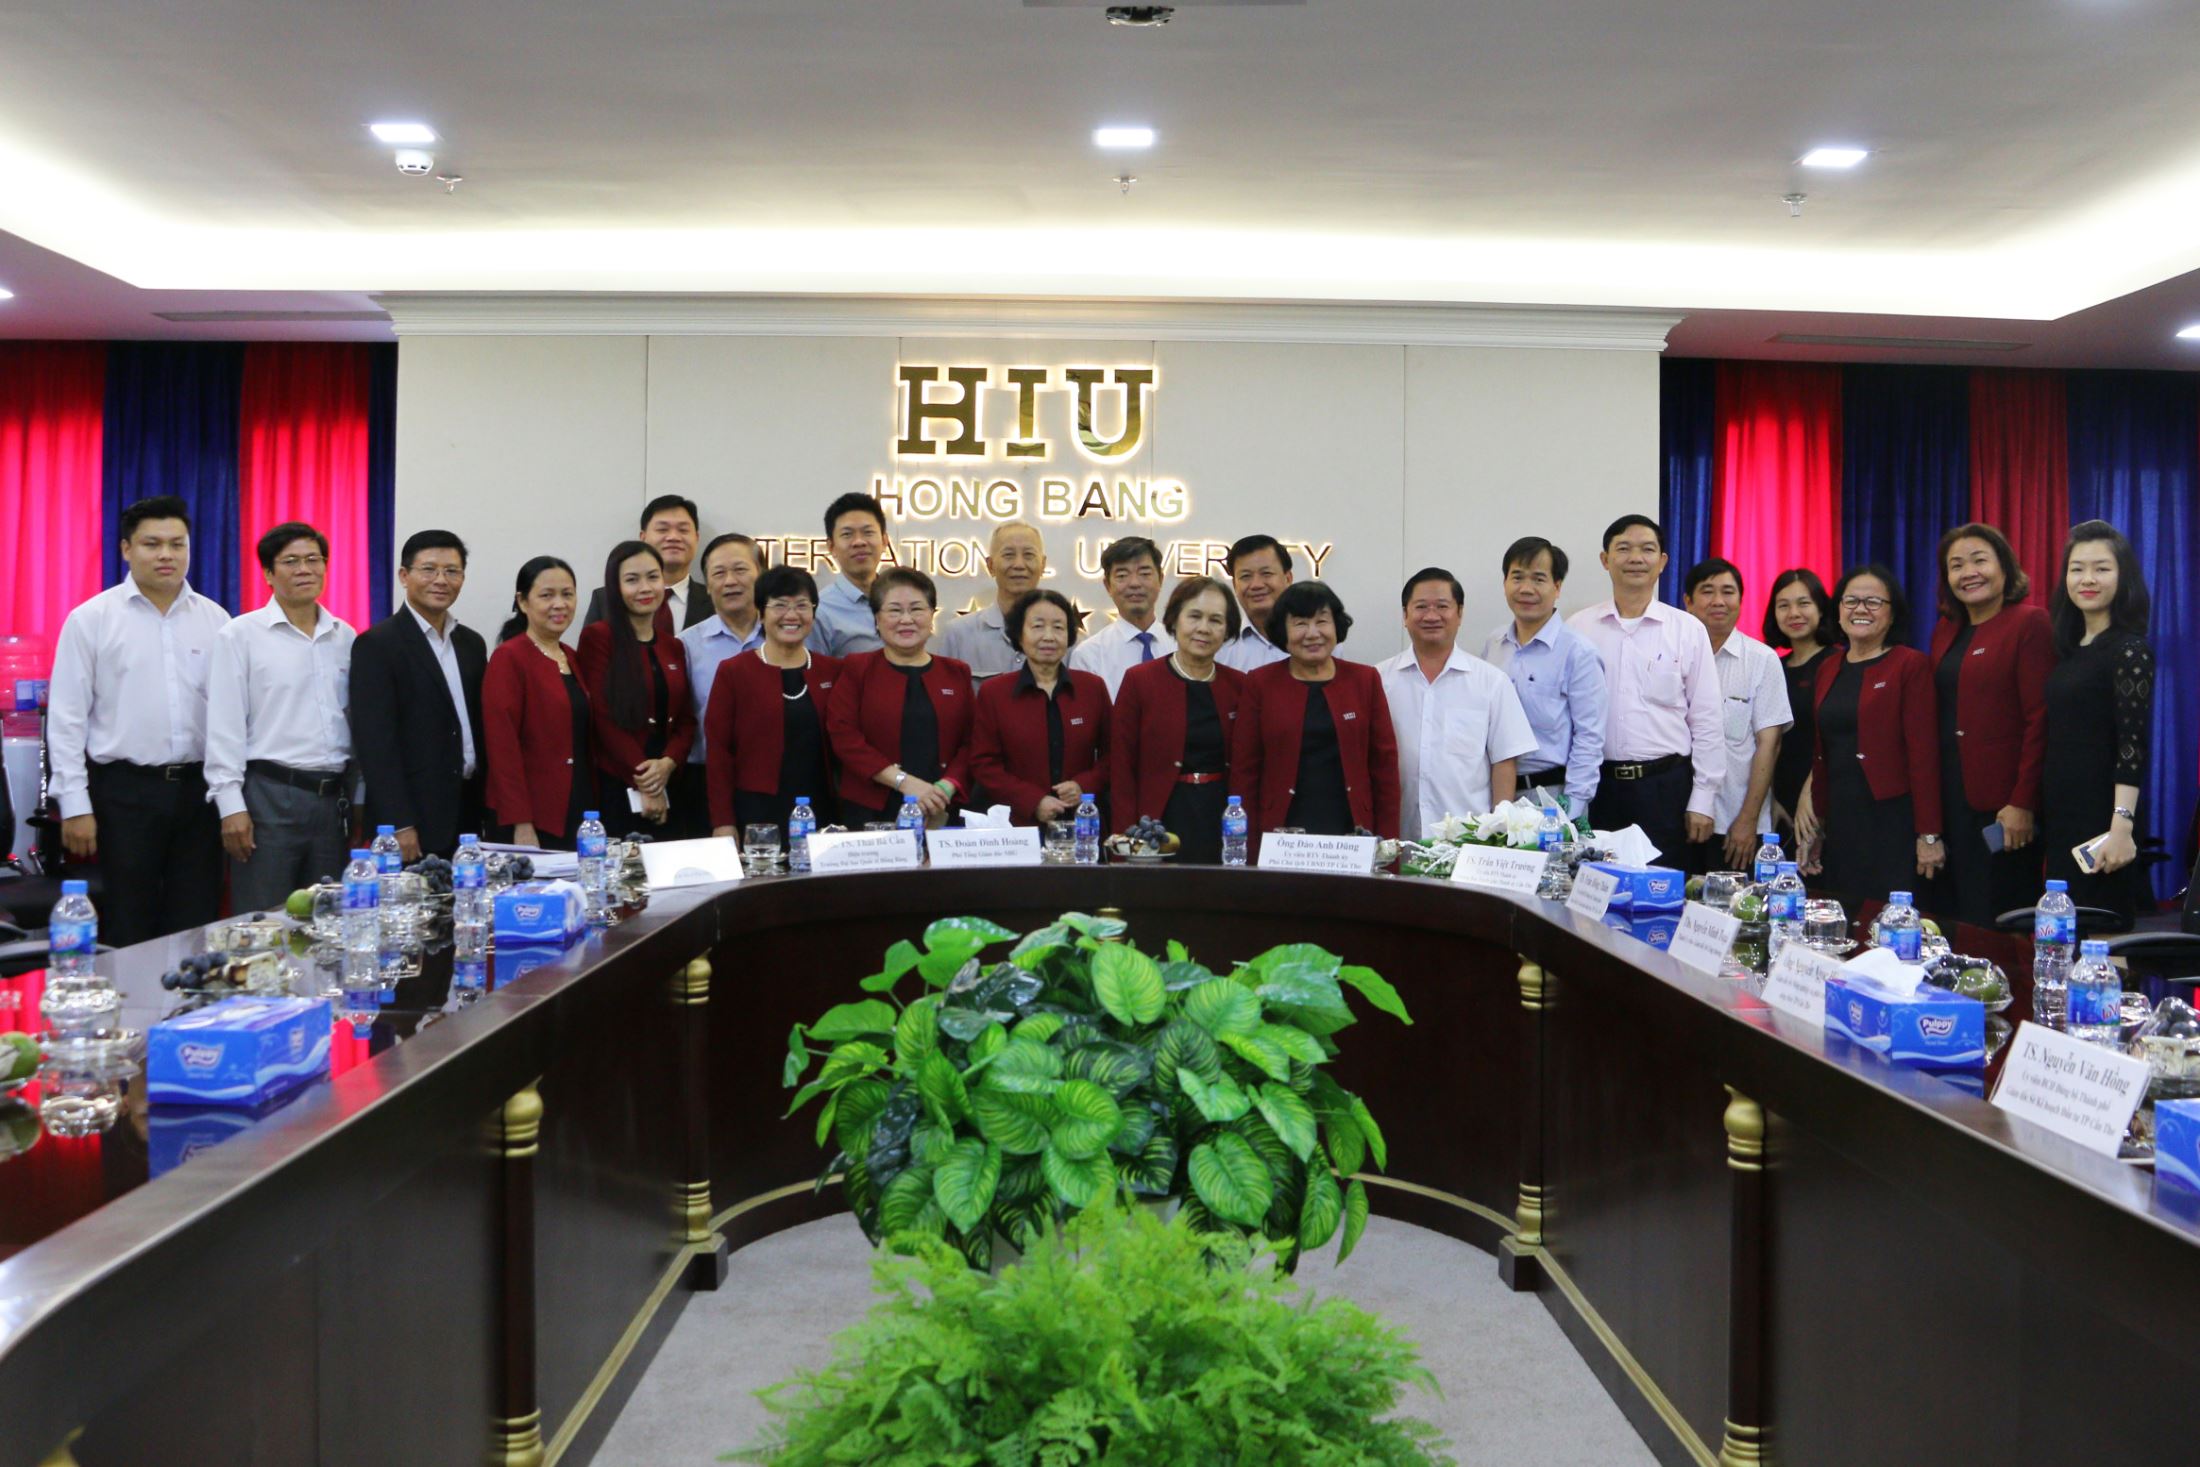 The delegation of Can Tho City together with the administrators and the lectureres of HIU